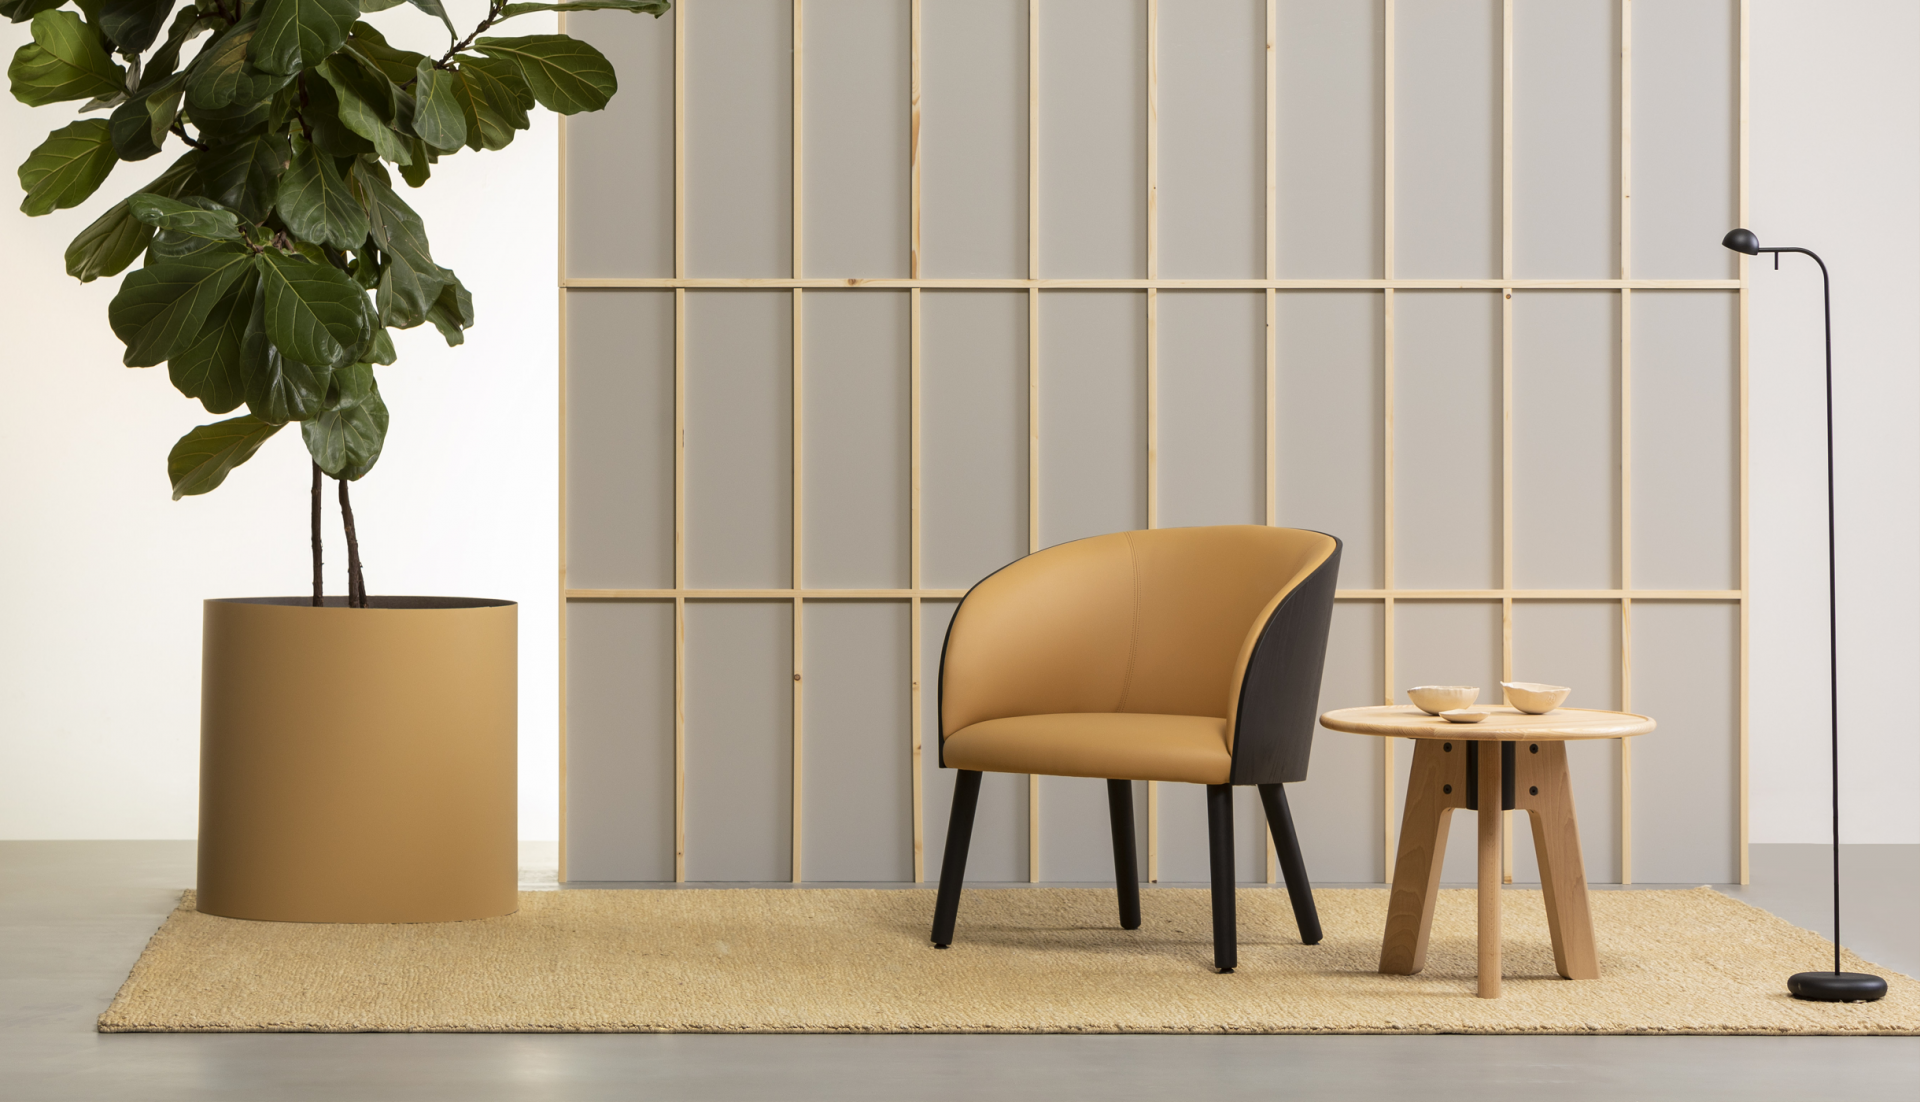 Cistell Original chair with armrests and wooden legs - Vergés